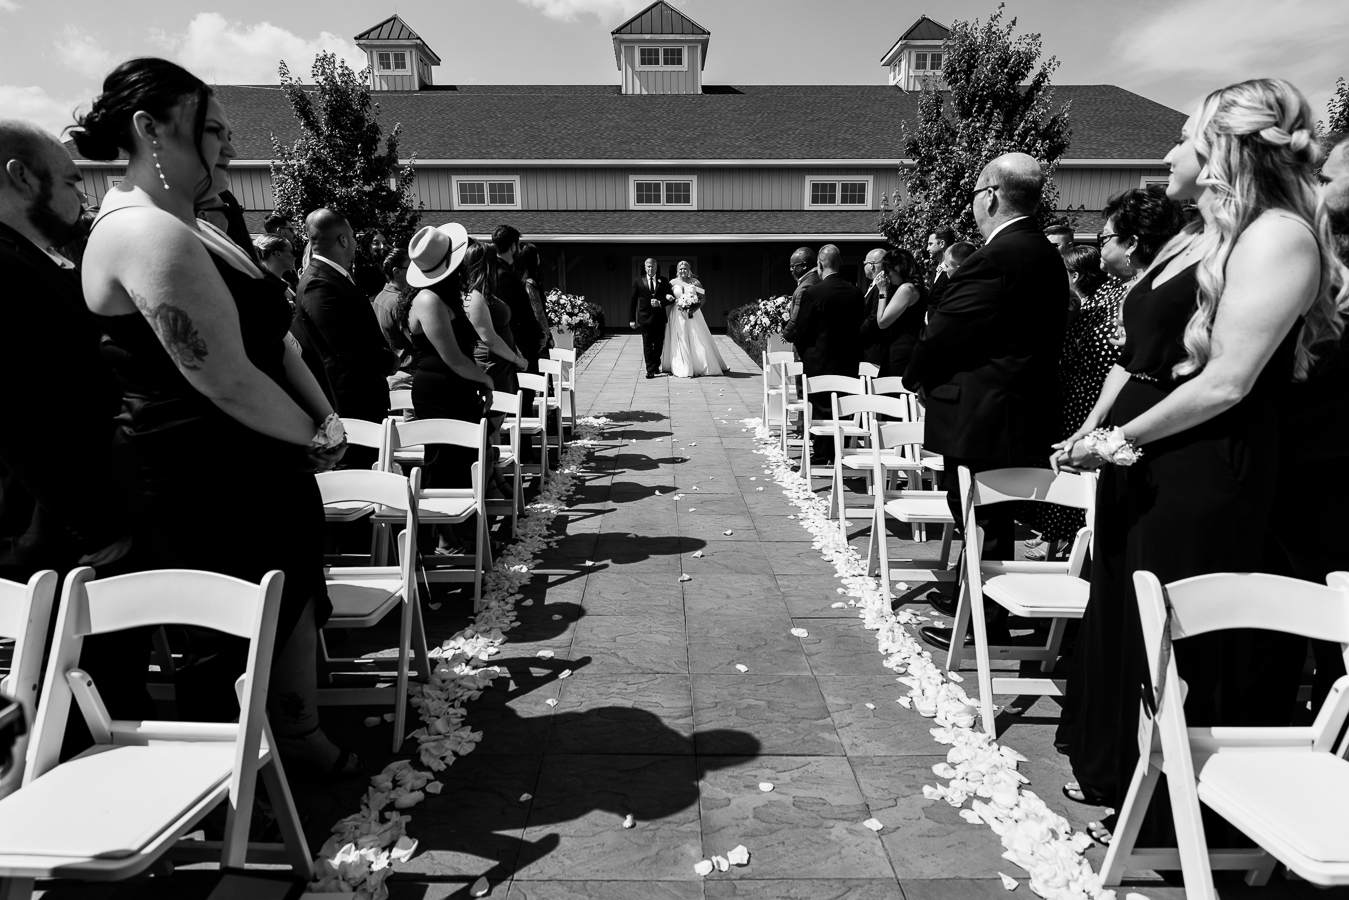 Middleburg Barn Wedding Photographer, lisa rhinehart, captures this black and white image of the bride and her father as they walk down the aisle together during the wedding ceremony 